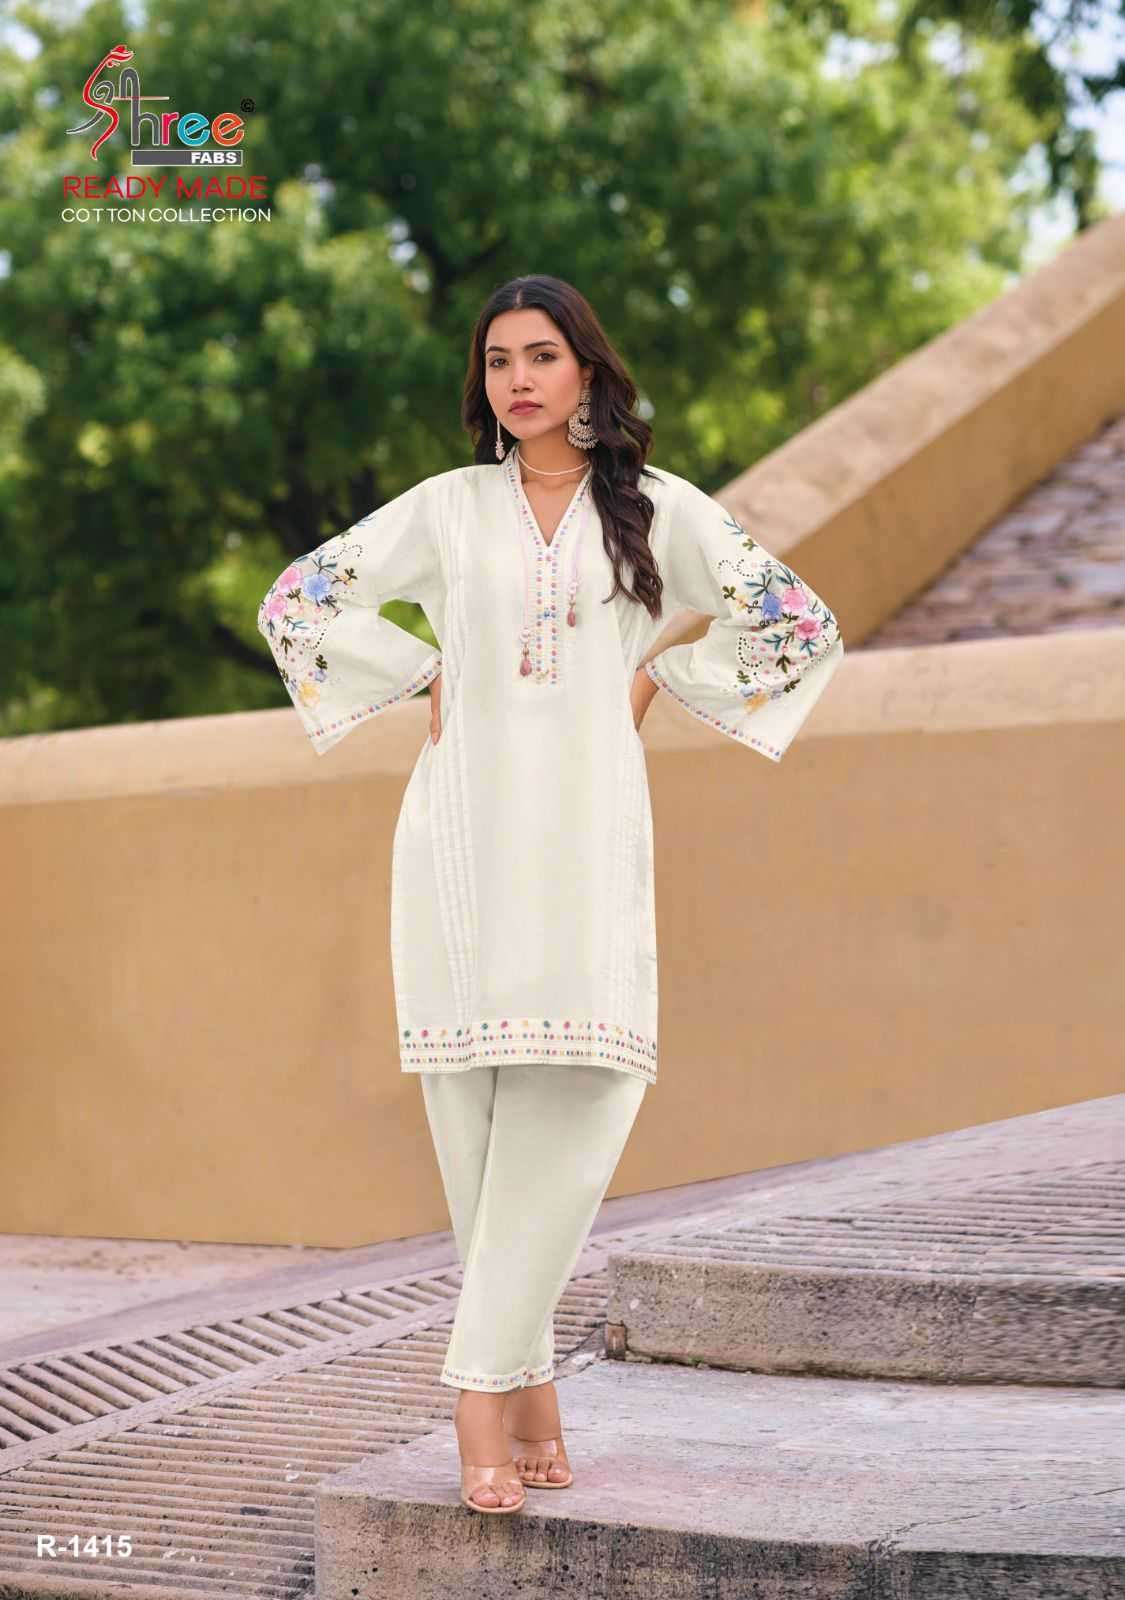 shree fabs 1415 cotton cambric lawn kurti with pant